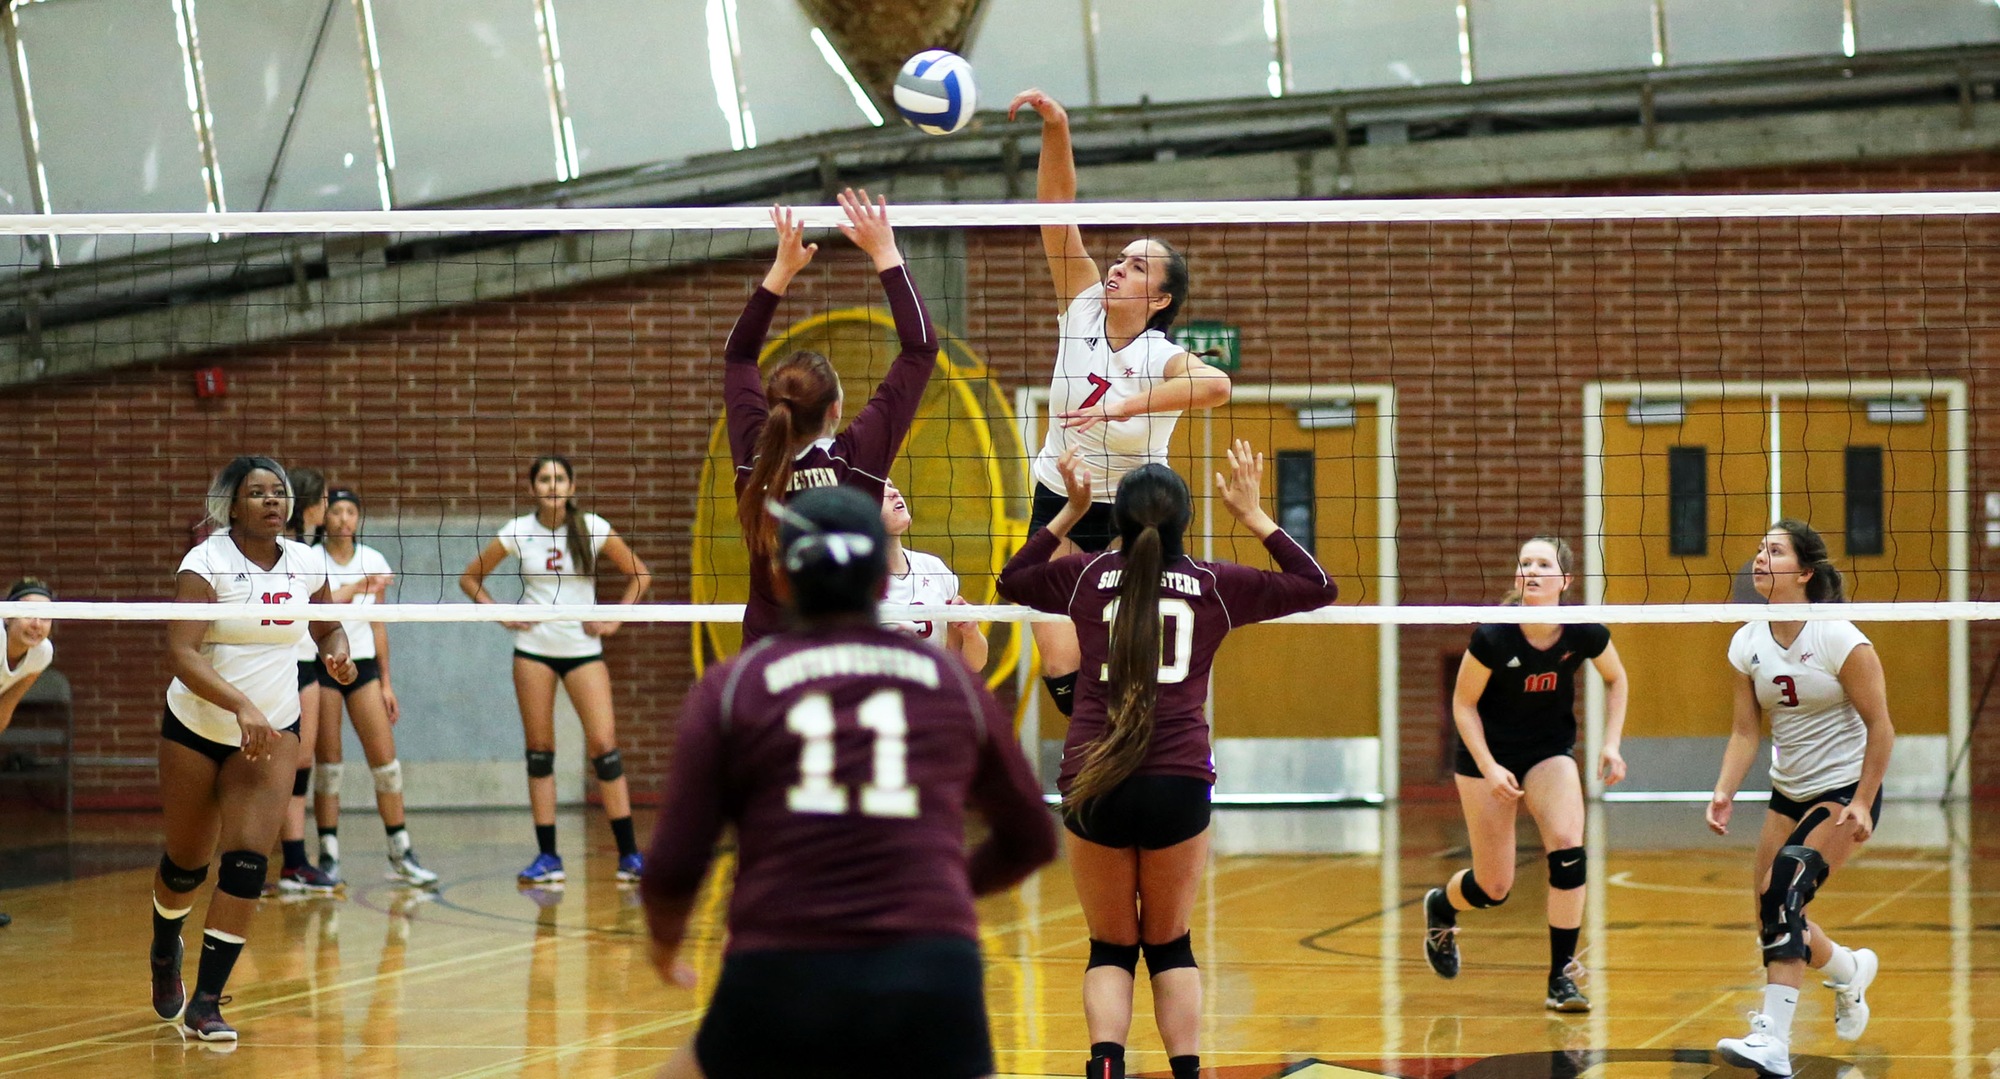 Samantha Radebaugh spikes the ball in sweep of visiting Southwestern. -- Photo by Hugh Cox